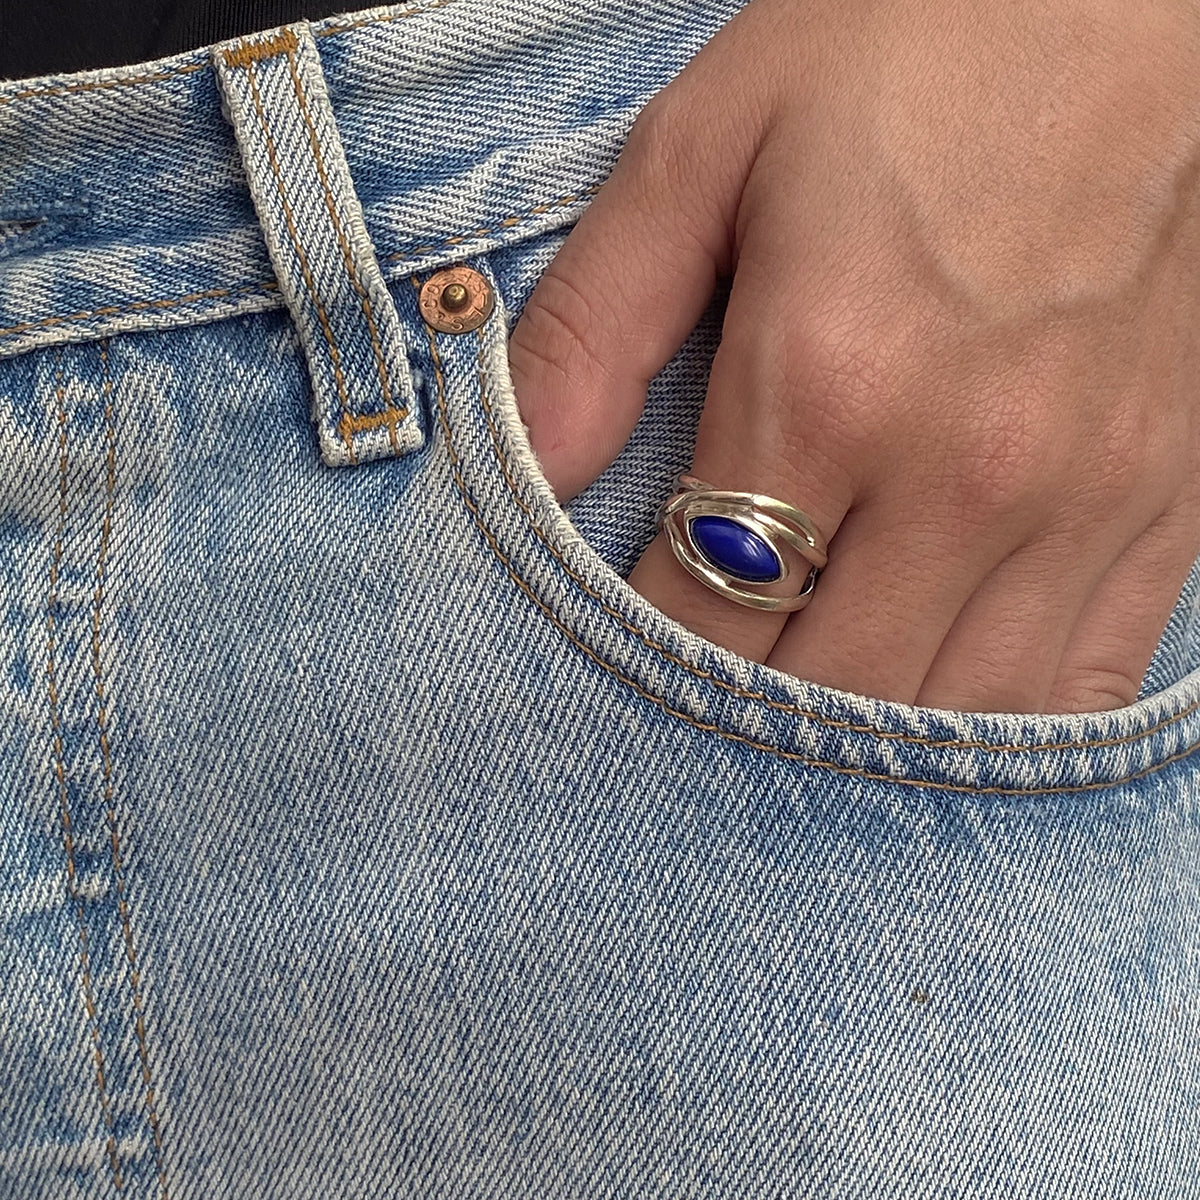 The Azul ring is a handmade piece made of 925 sterling silver. It features a semi-precious stone called blue lapis. 